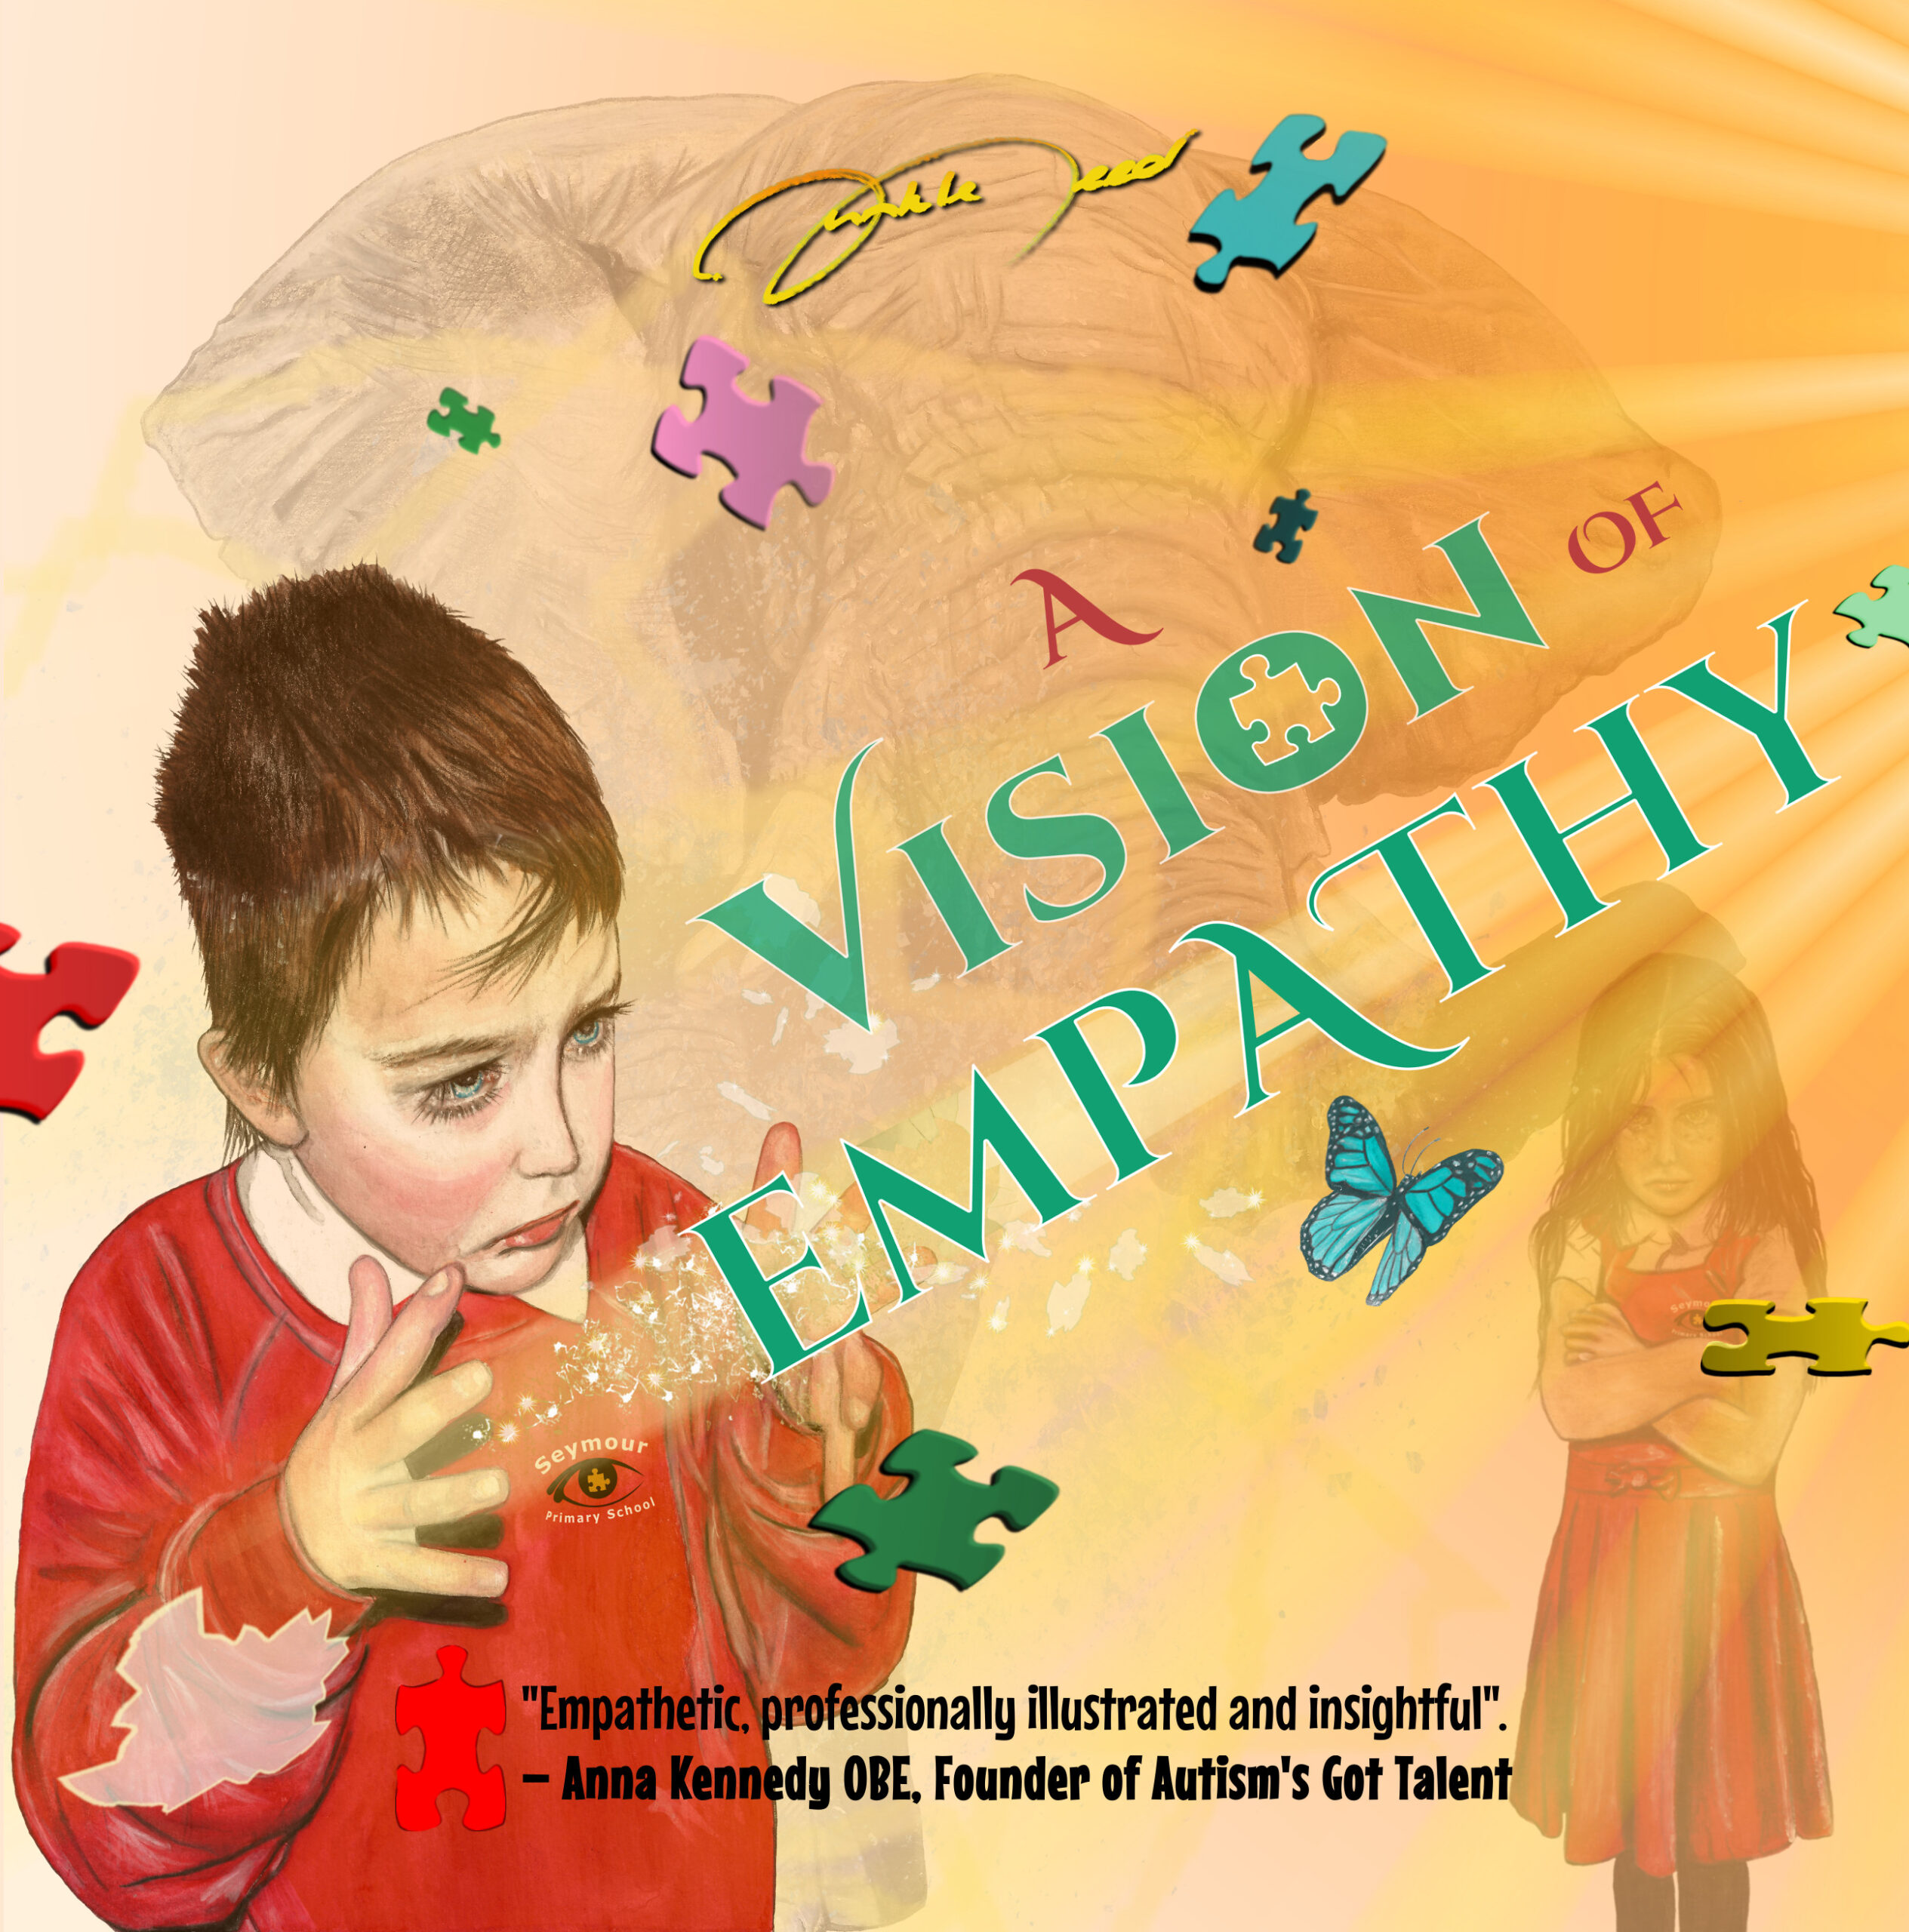 FREE: A Vision of Empathy by Dunkle Deed